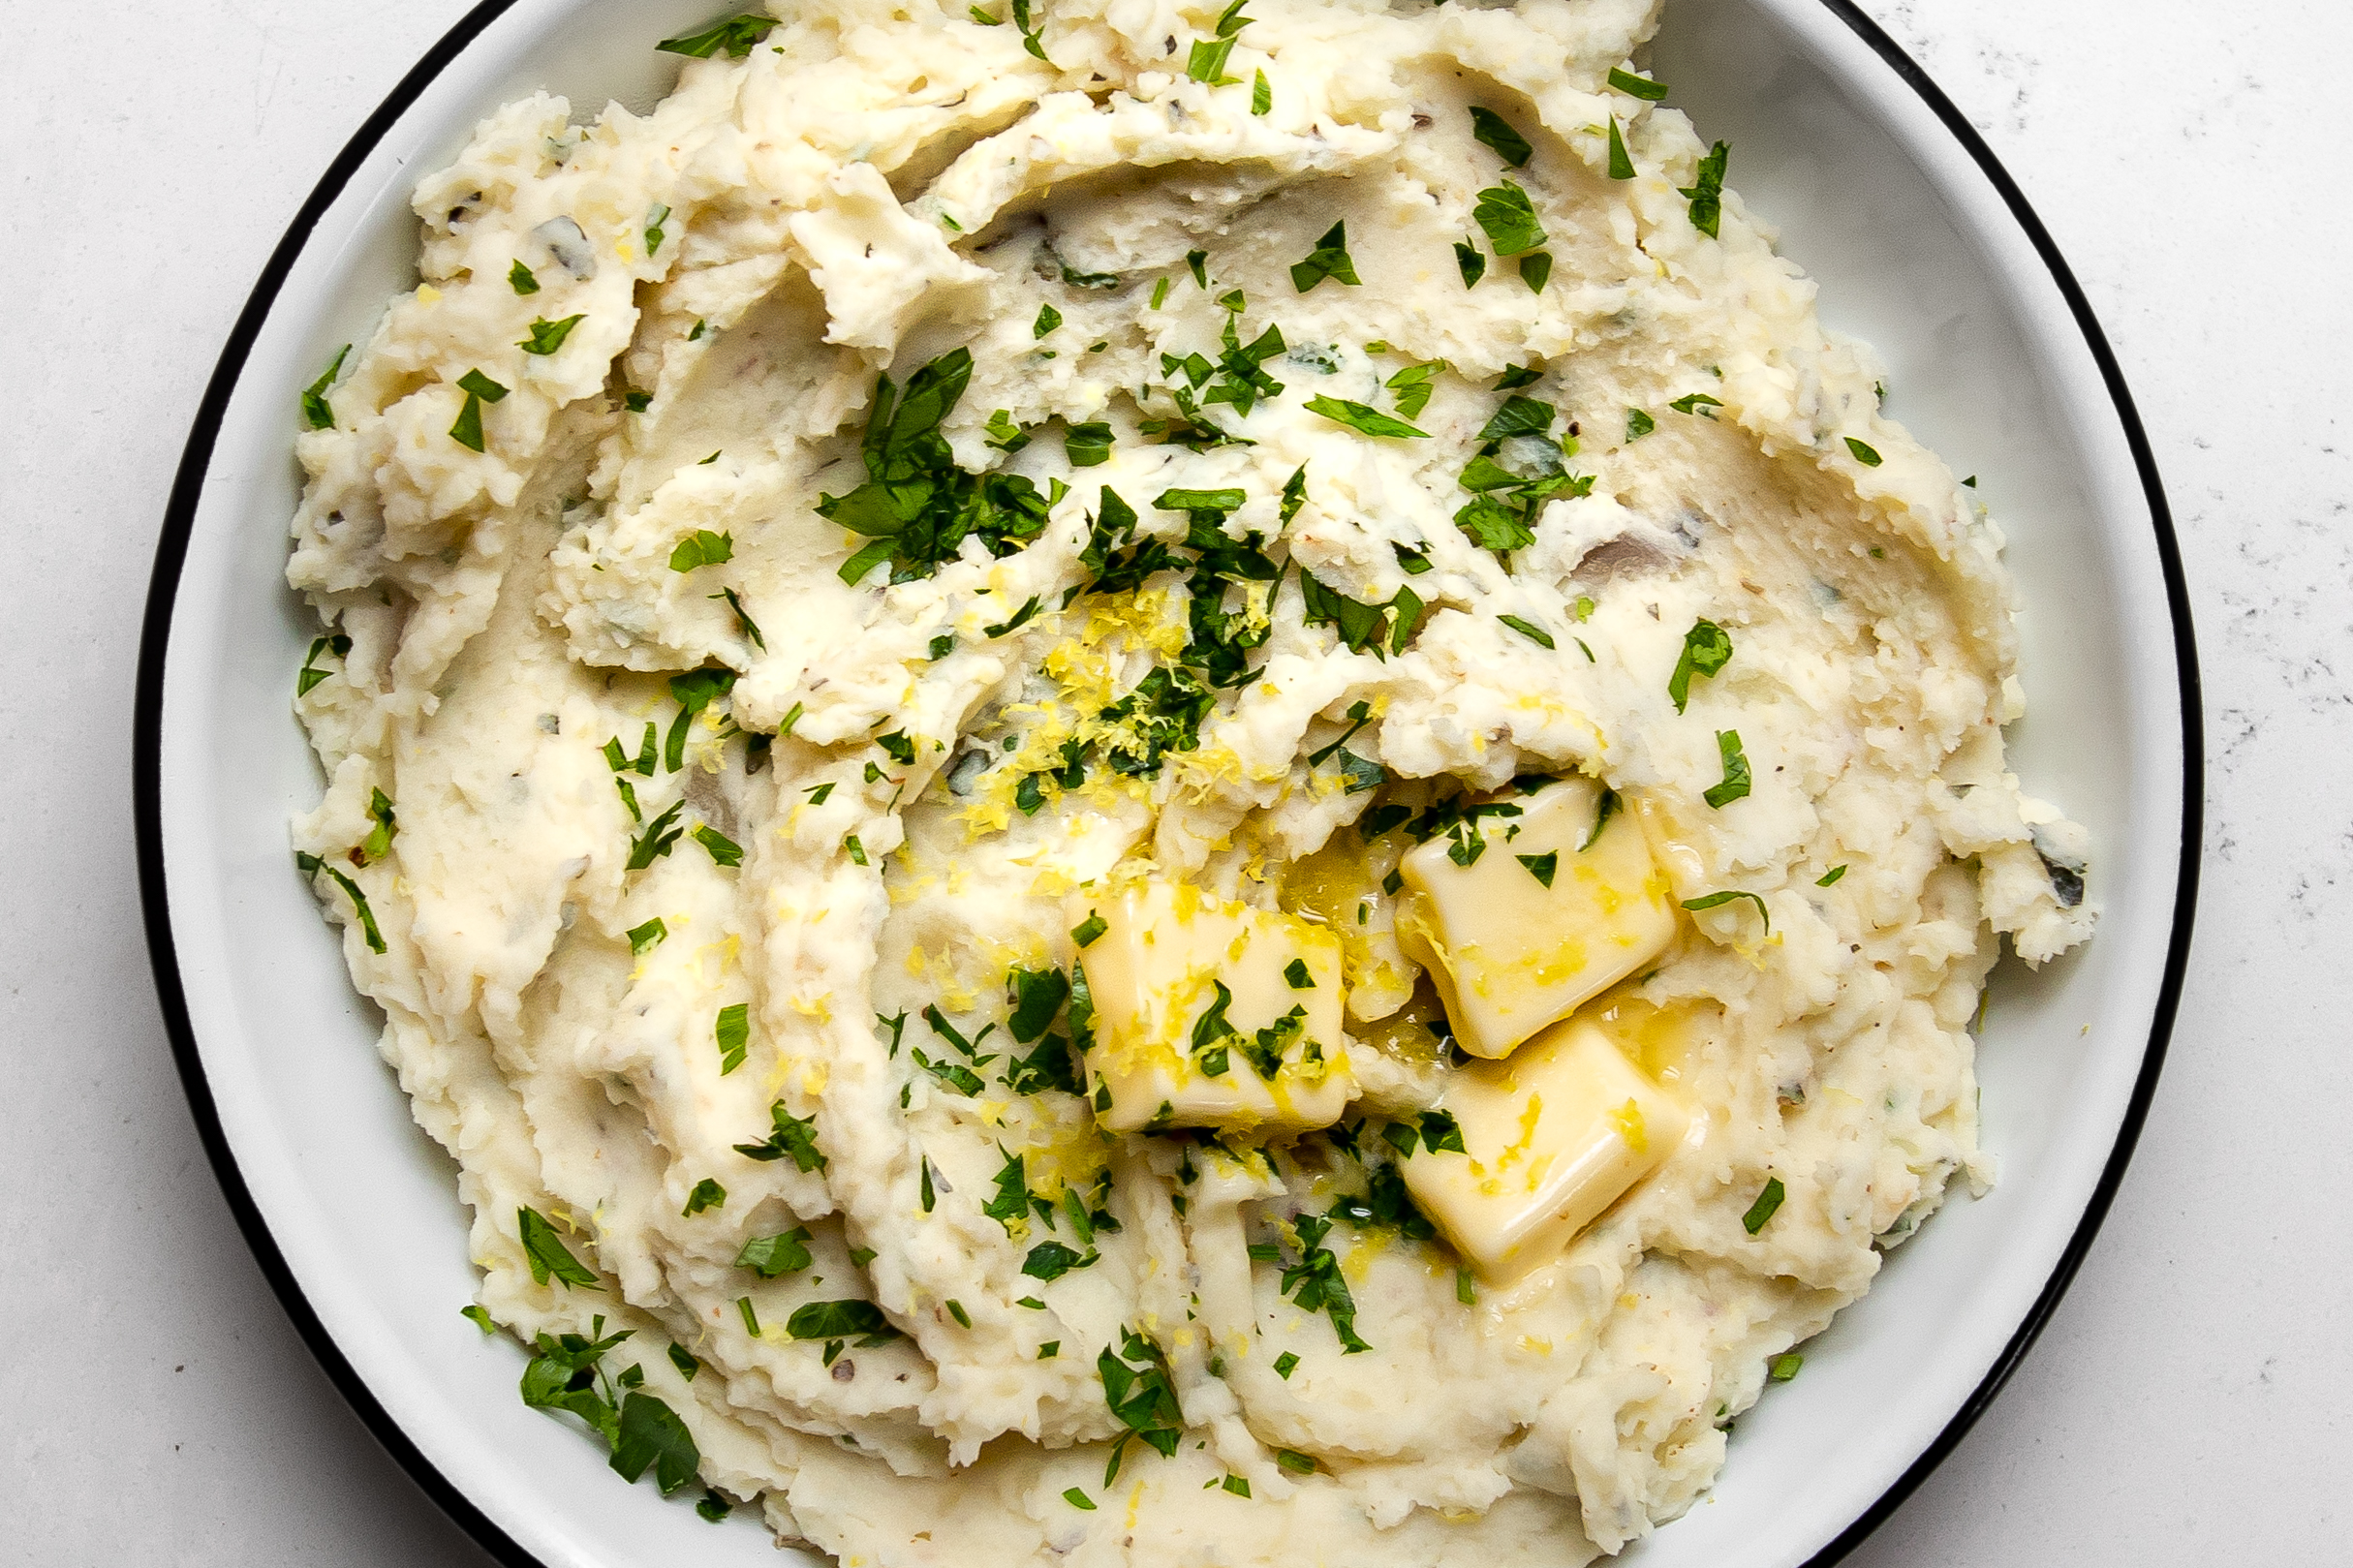 cream cheese and milk infused mashed potatoes